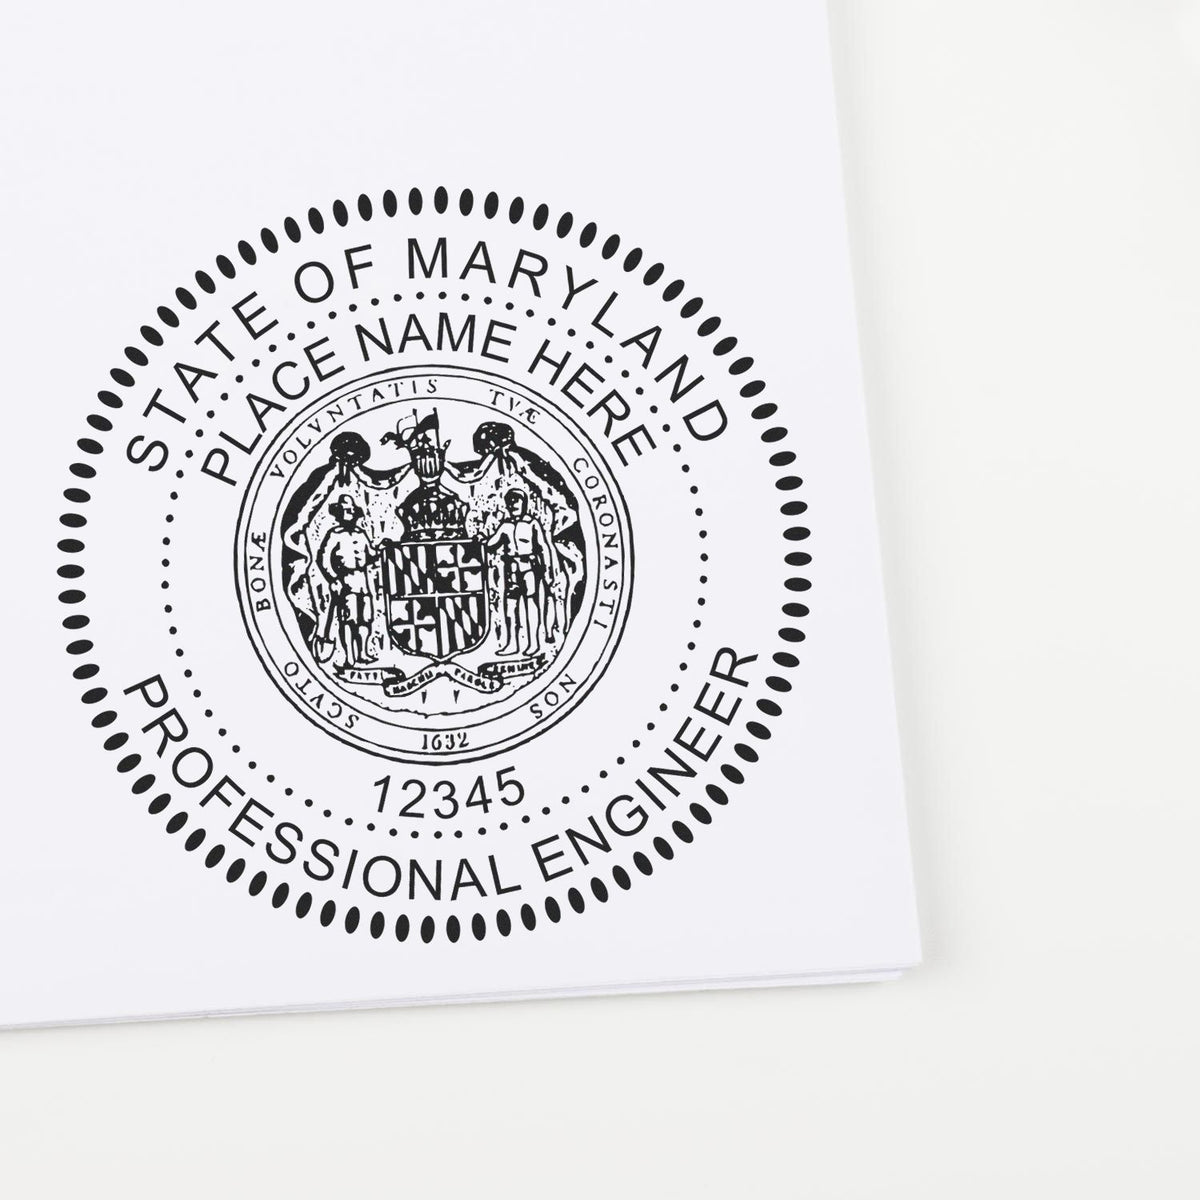 A stamped impression of the Digital Maryland PE Stamp and Electronic Seal for Maryland Engineer in this stylish lifestyle photo, setting the tone for a unique and personalized product.